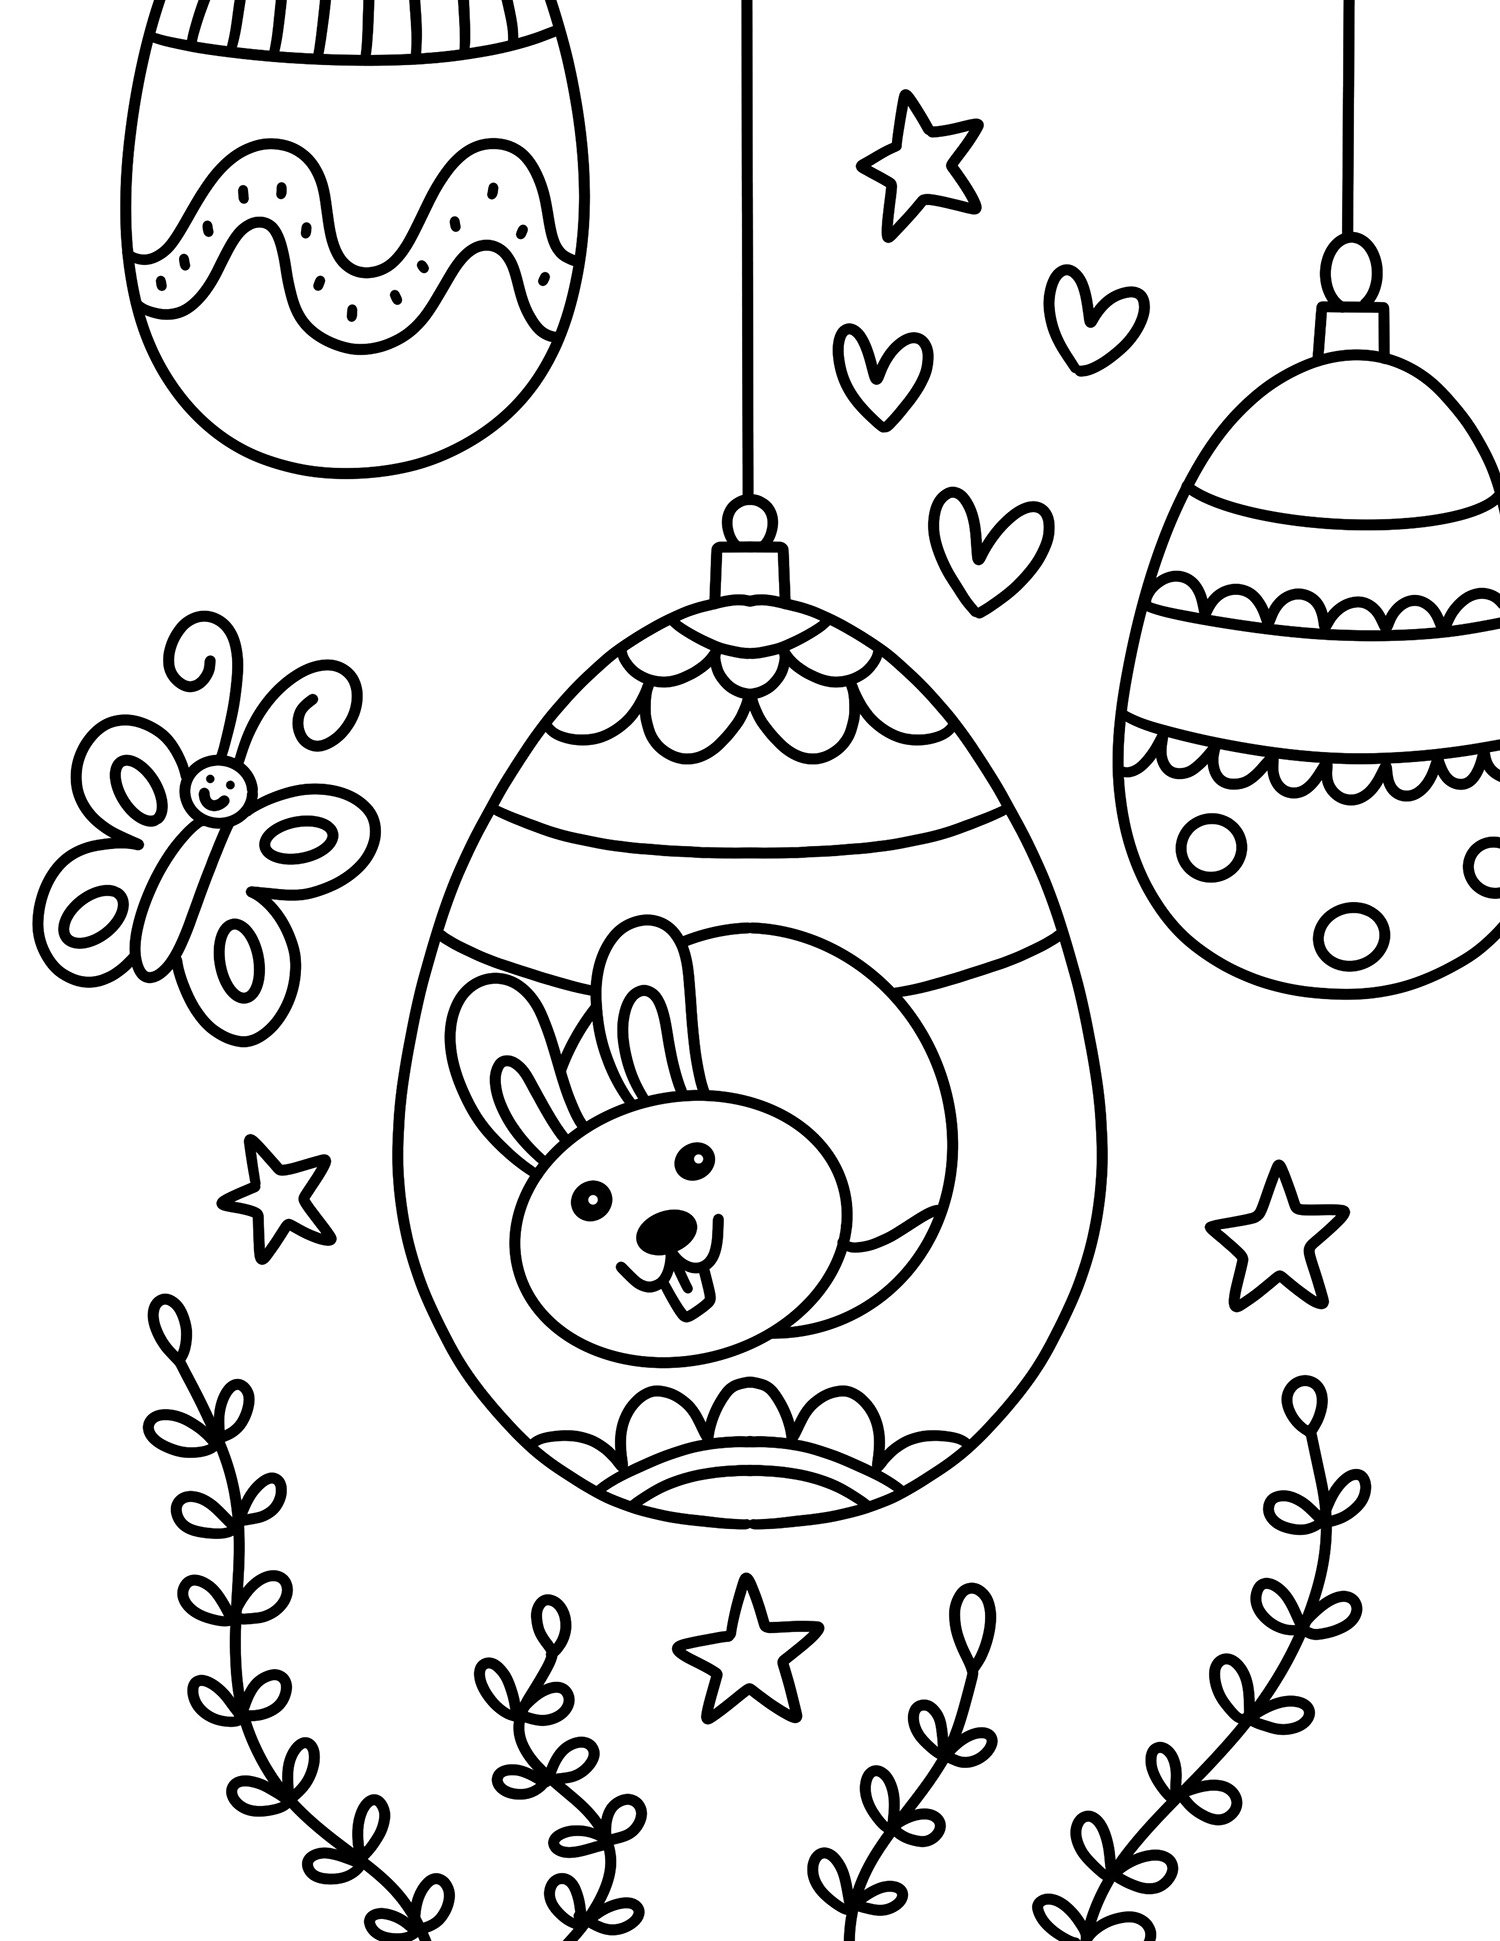 coloring-uncategorized-freetable-easter-coloring-pages-for-preschoolers-worksheets-toddlers